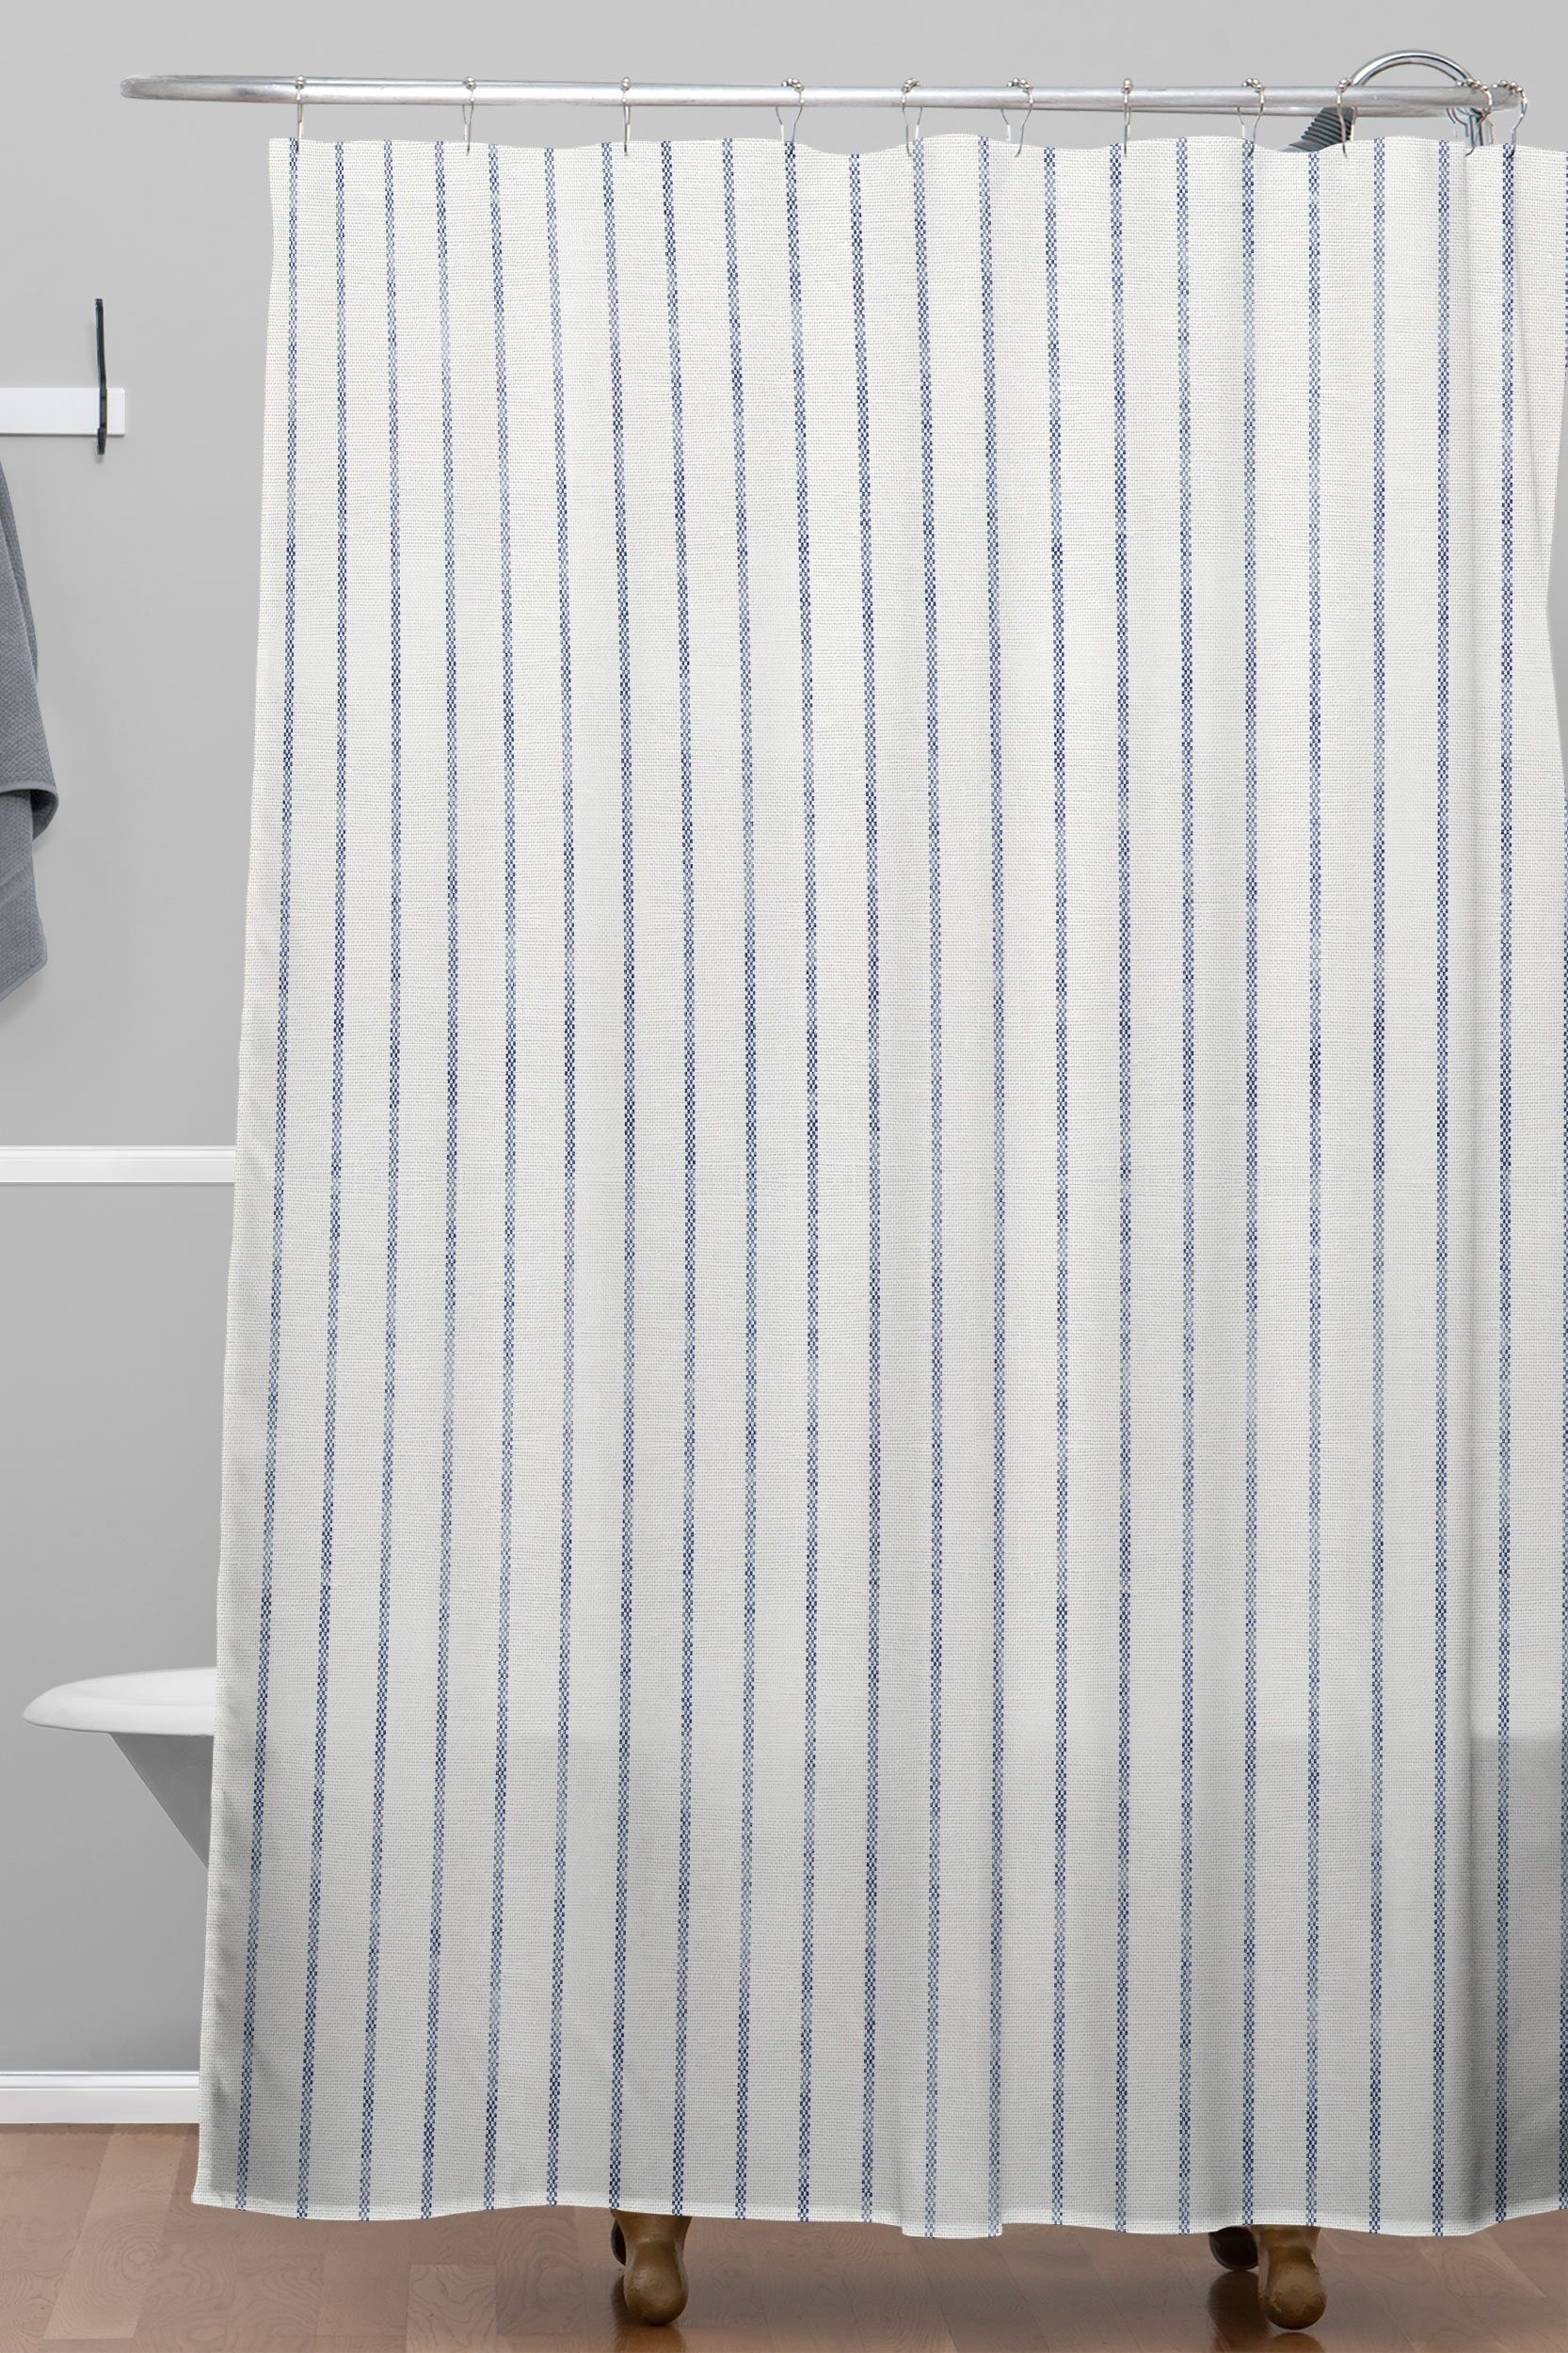 Holli Zollinger AEGEAN WIDE STRIPE Shower Curtain - Standard 71"x74" with Rings - Image 1